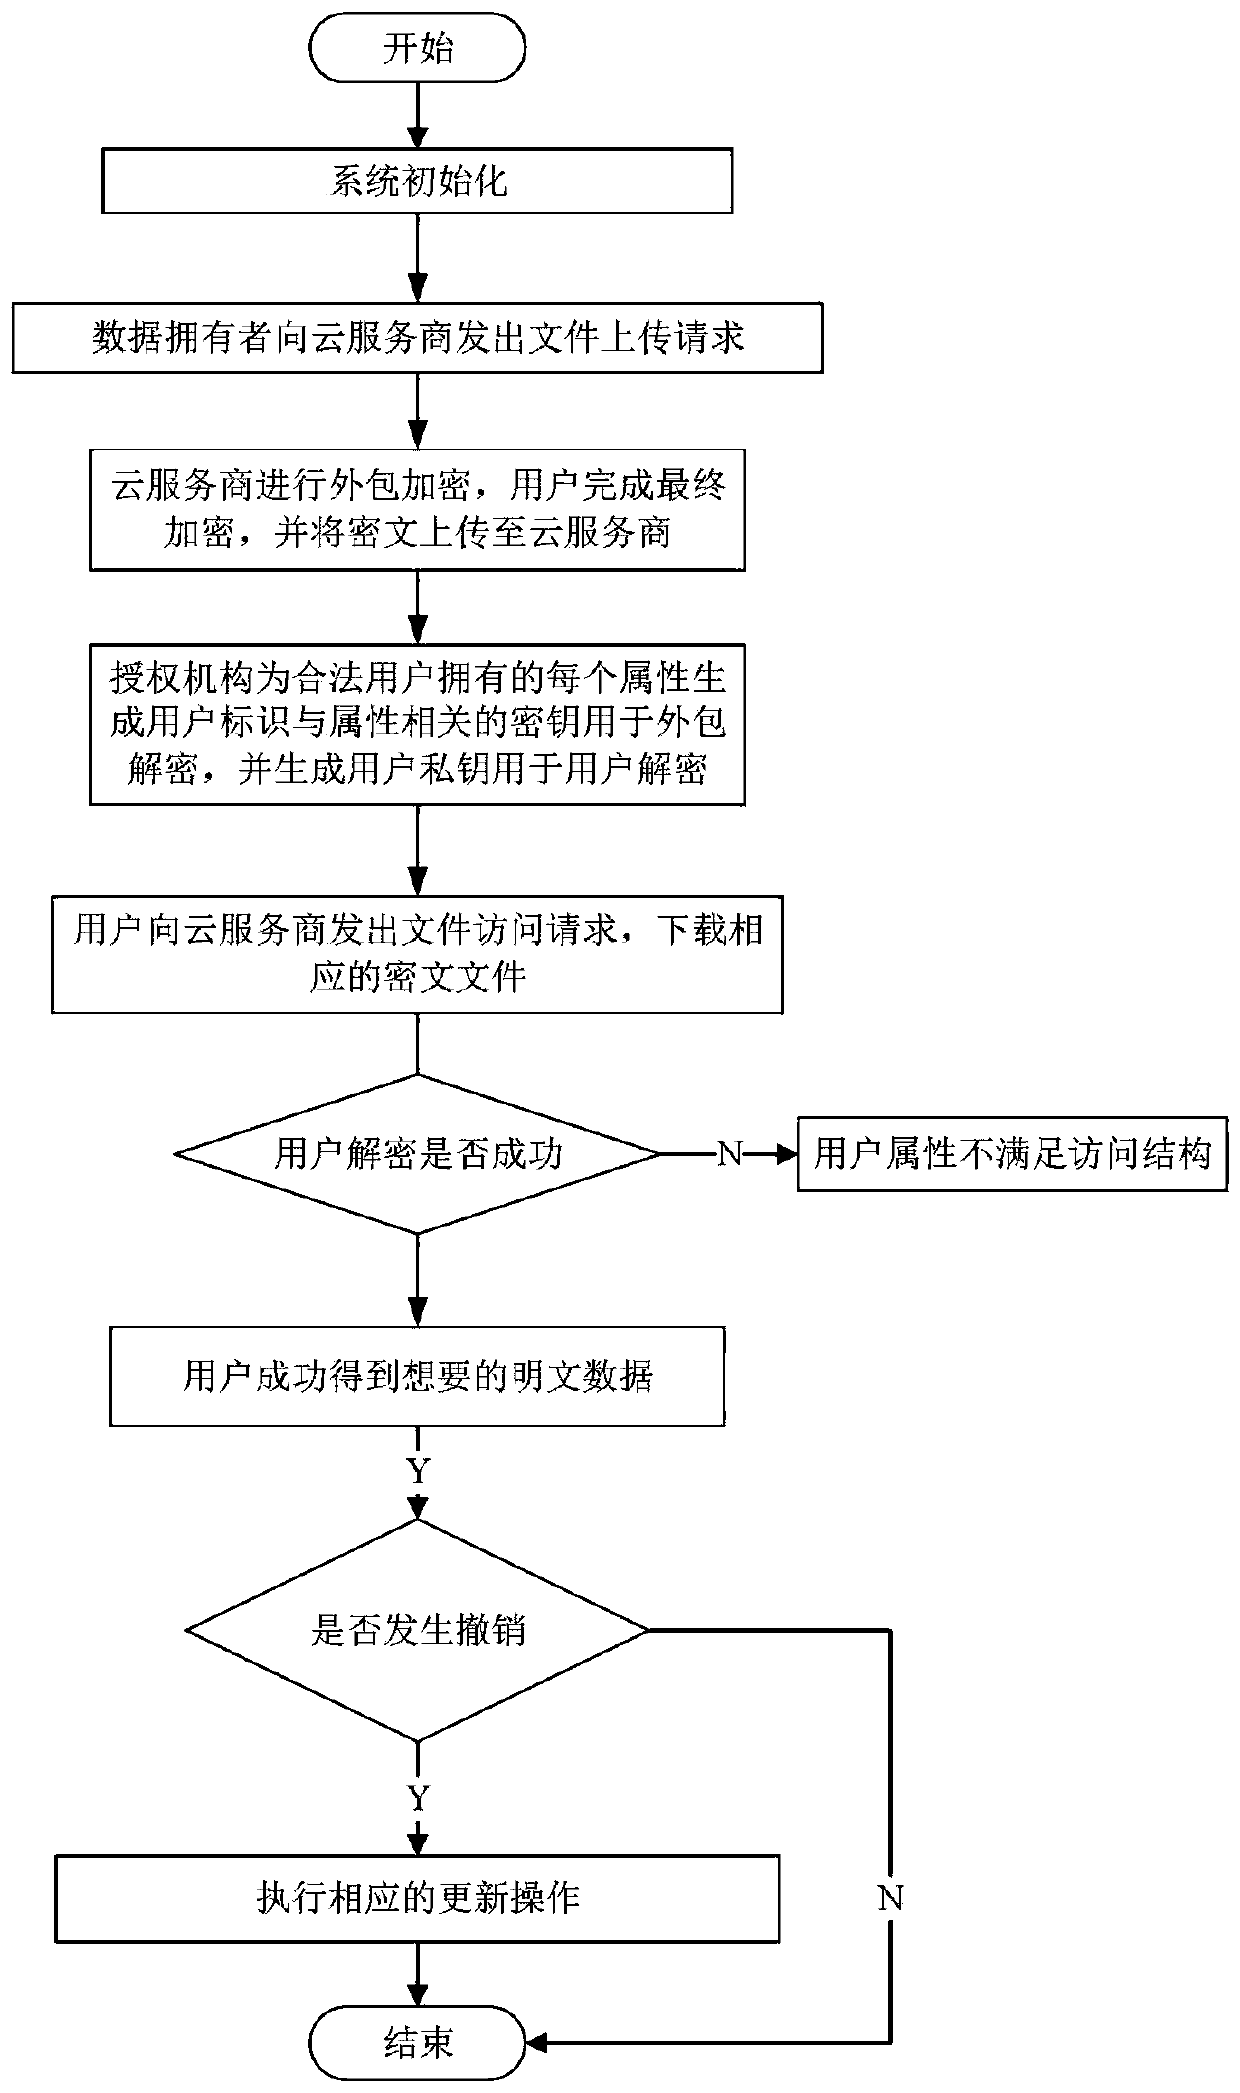 Multi-authorization center access control method and system and cloud storage system